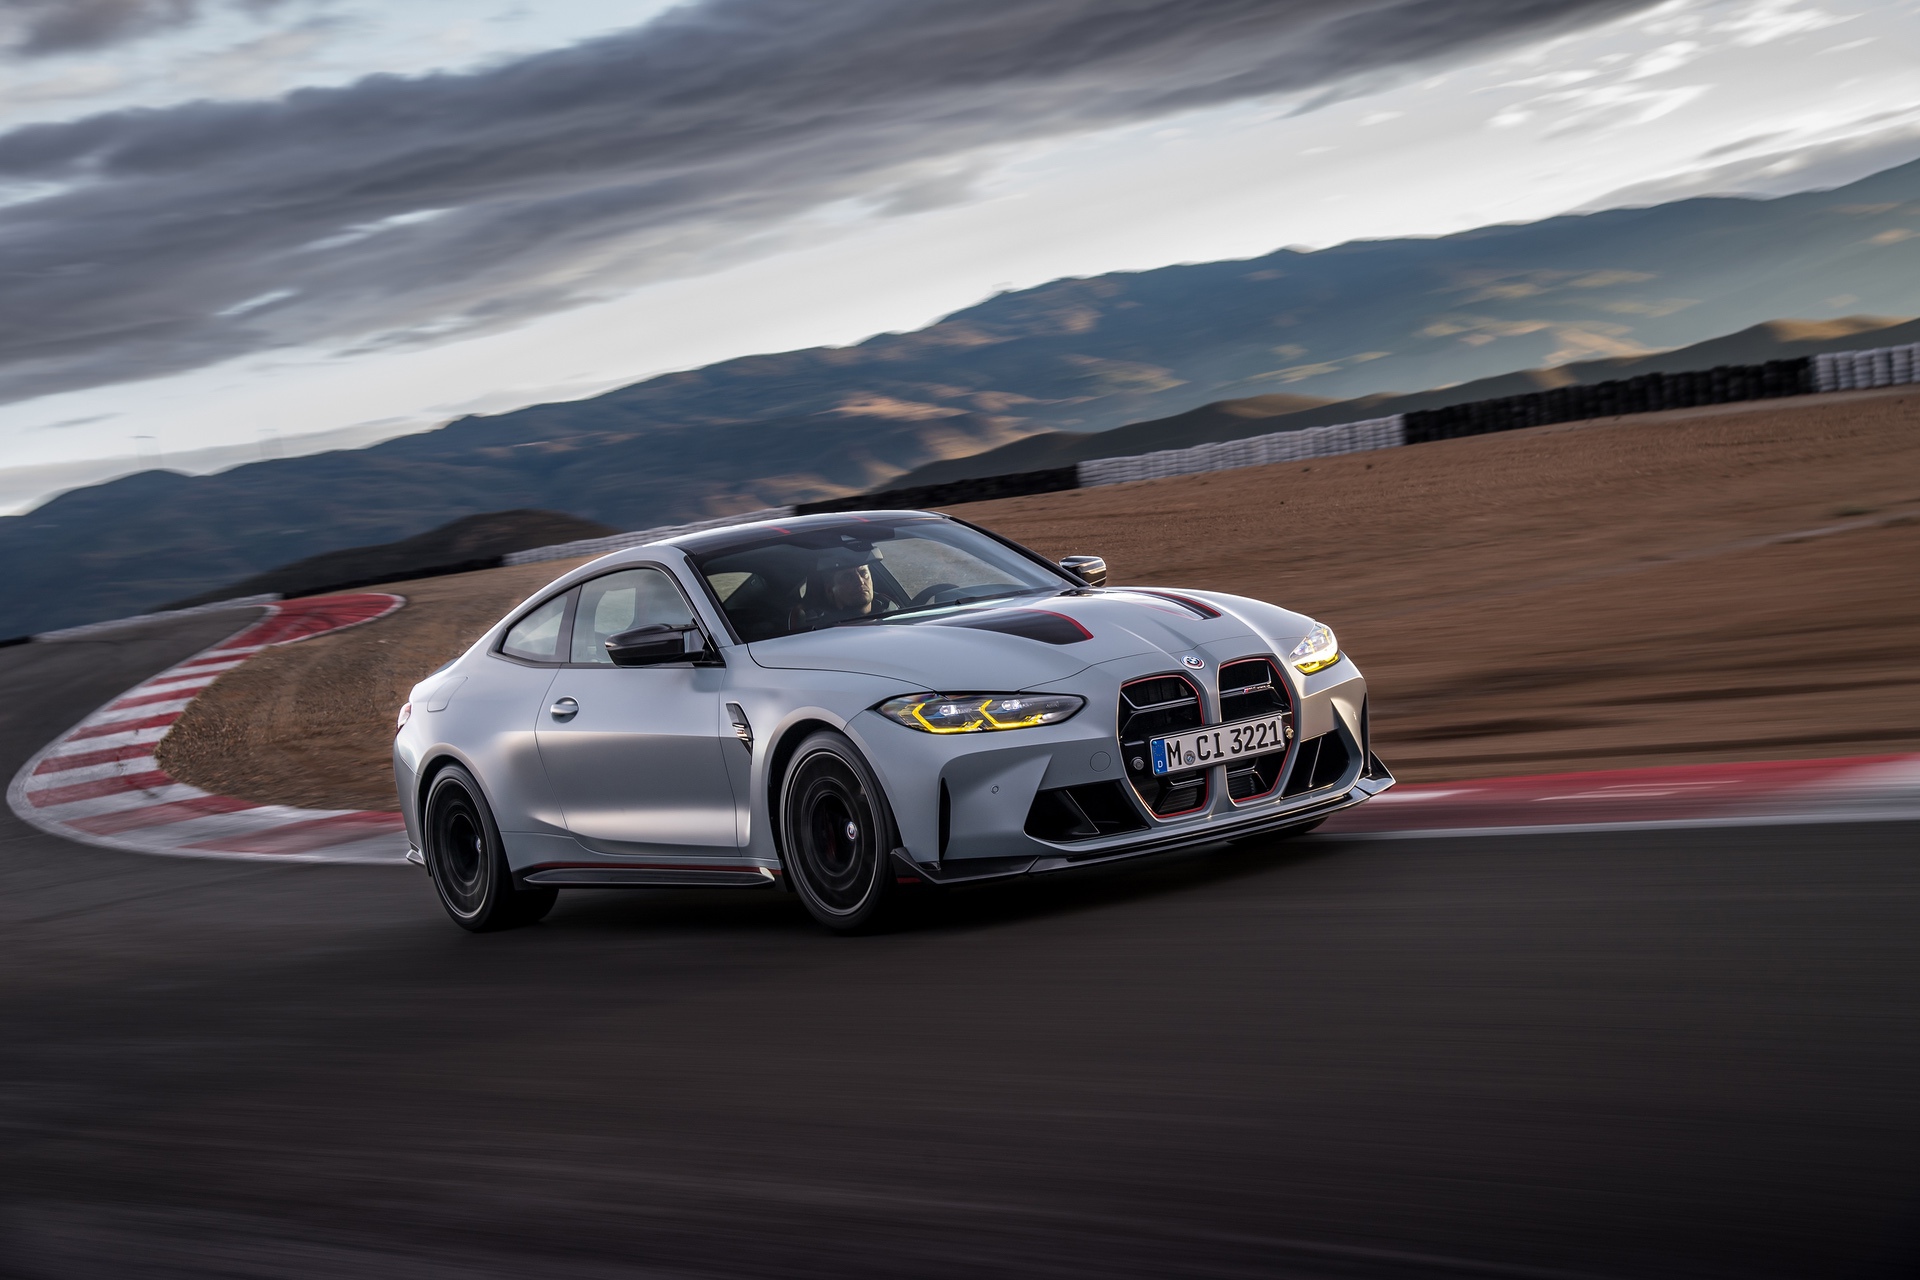 BMW M4 CSL sets a new lap record at the Nürburgring